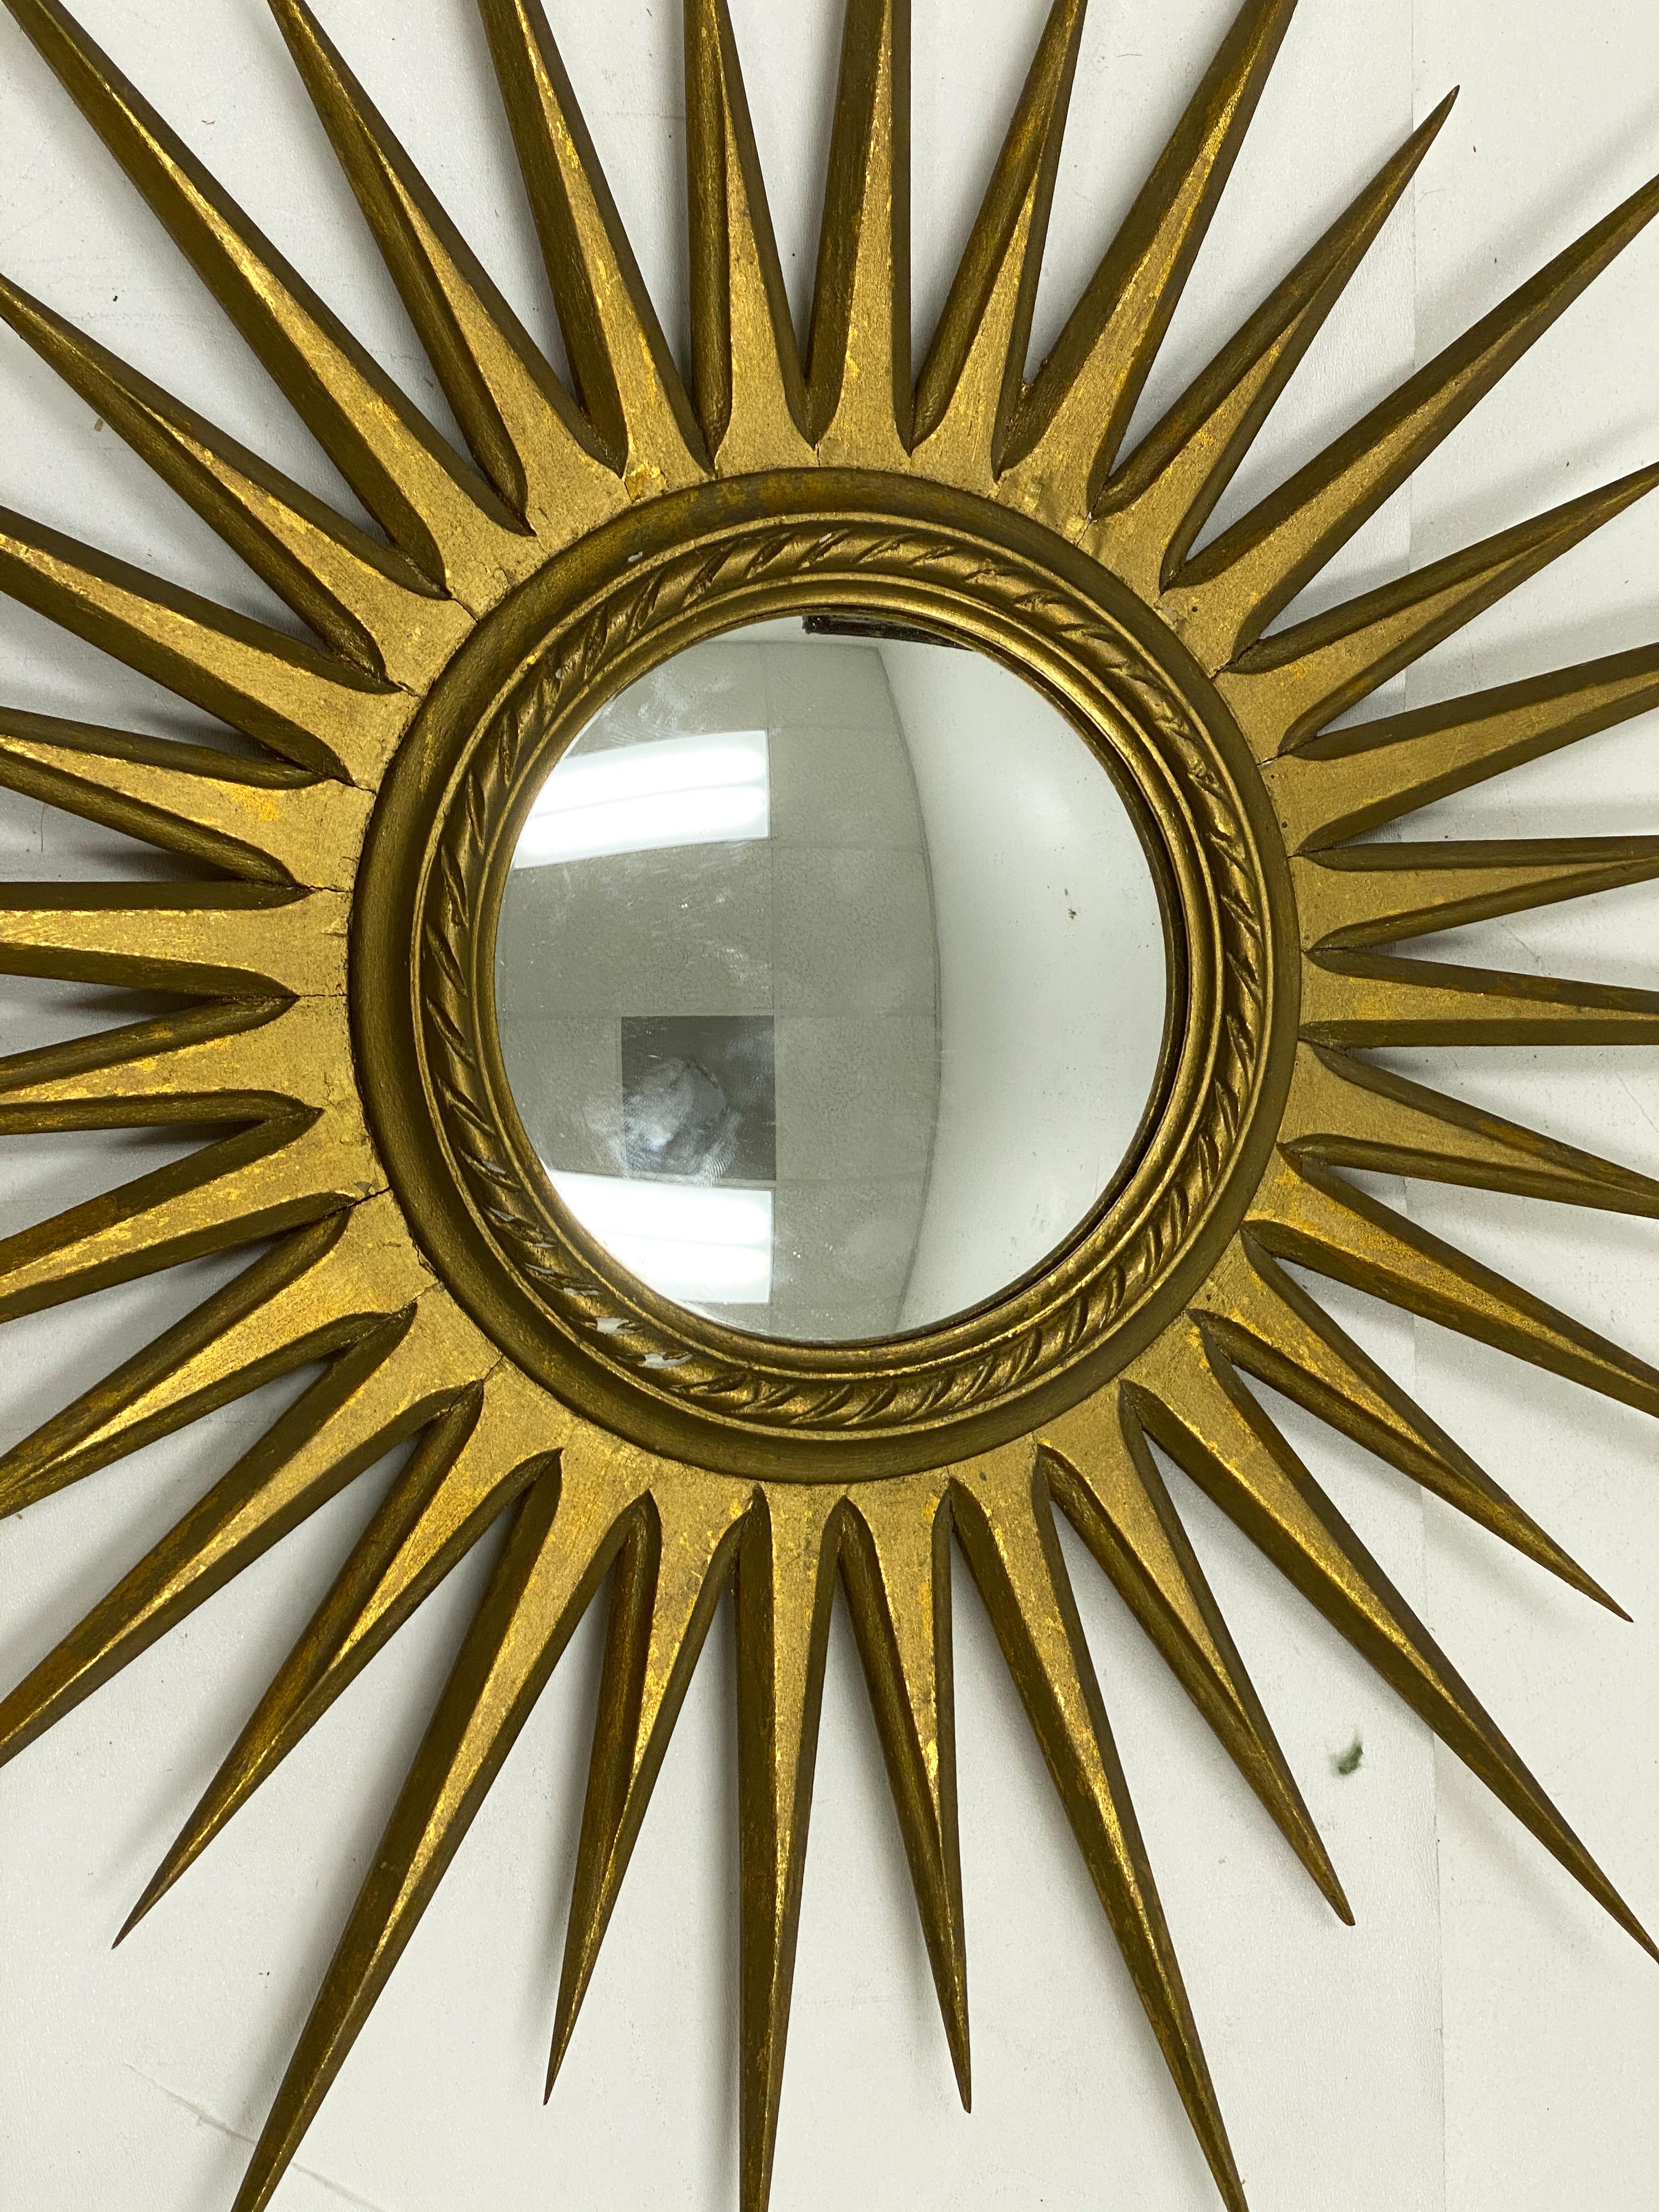 This is a midcentury Italian giltwood convex sunburst mirror. It dates to the 1960s and is unmarked.